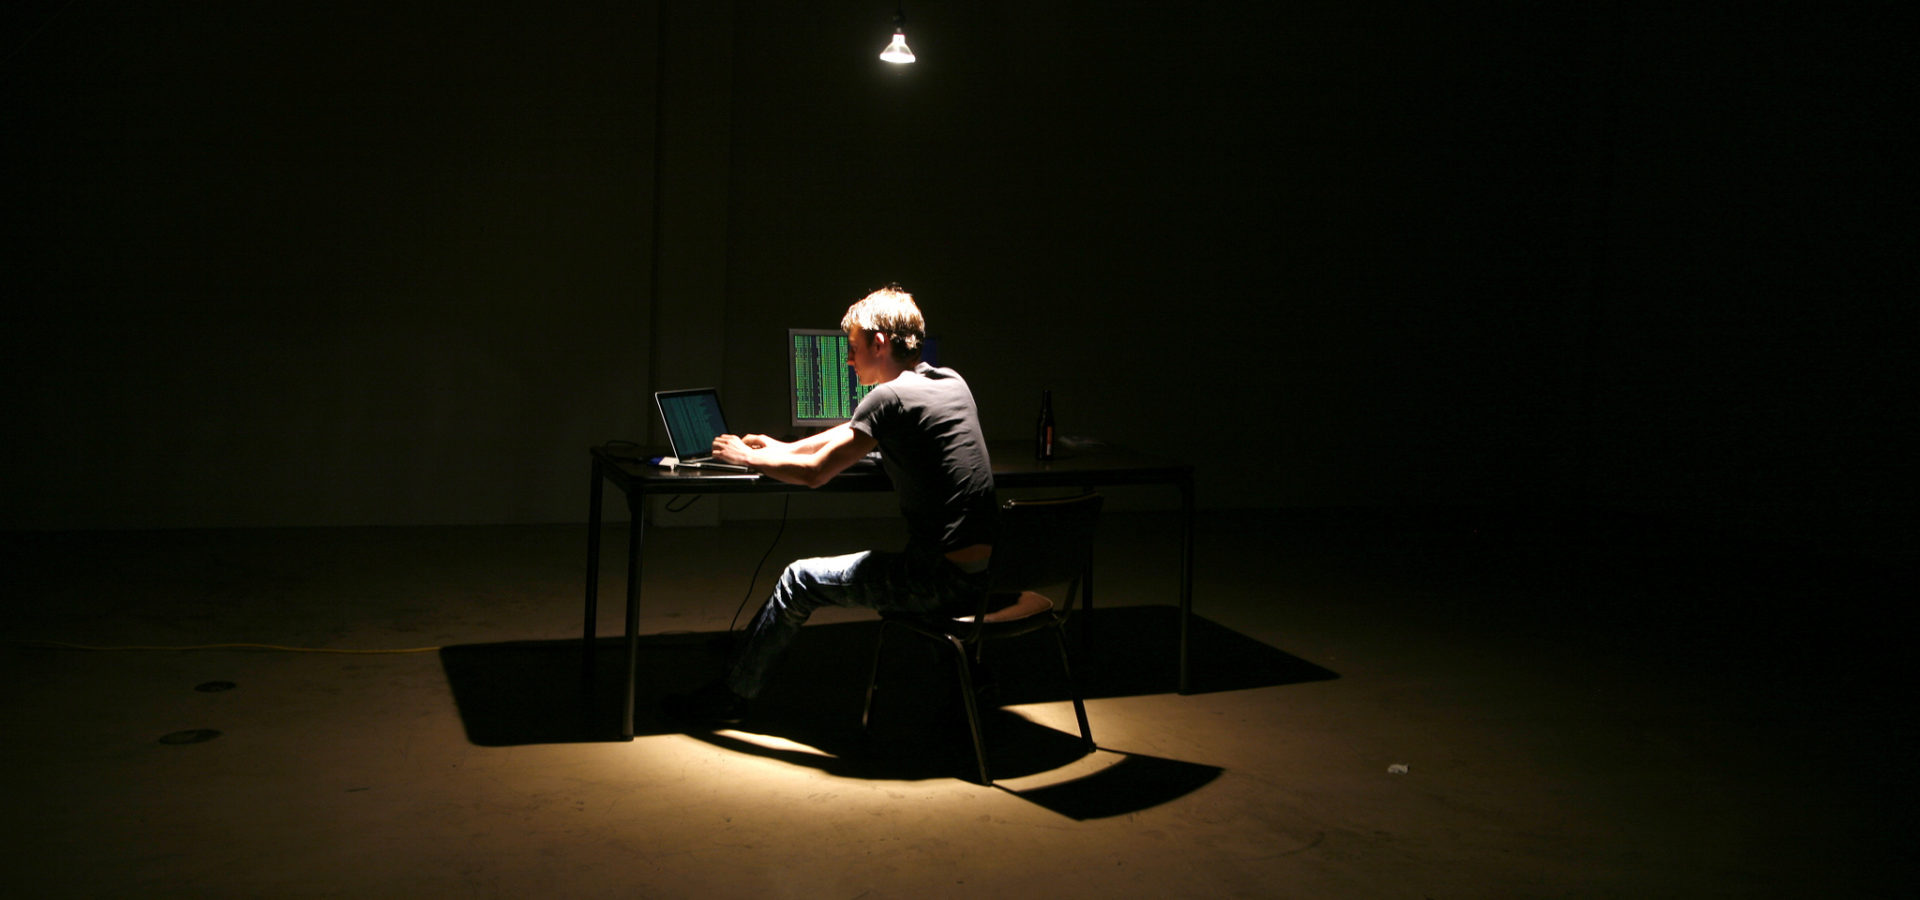 Alone in a warehouse, a hacker sits at a laptop while another screen displays data in green text. (Flickr / Brian Klug)